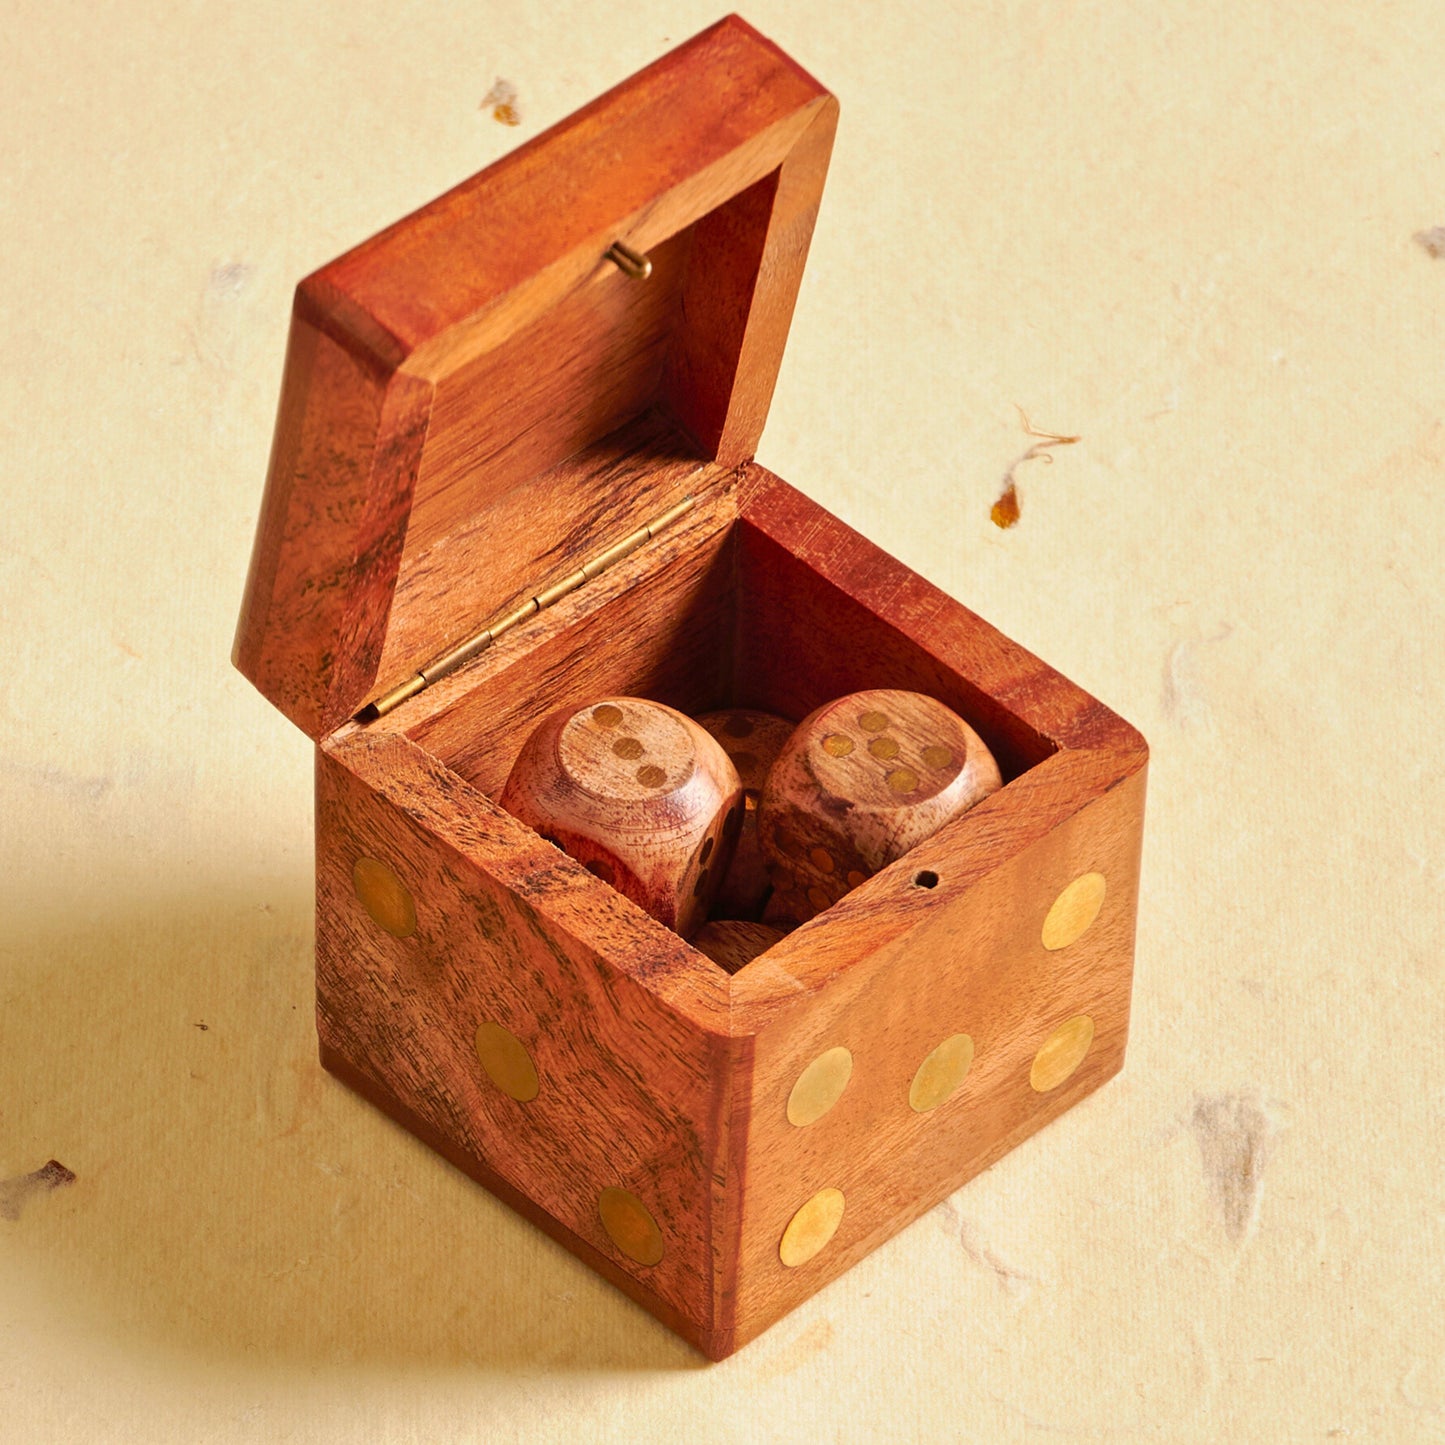 Wood & Brass Dice in Box Set of 6, Handcrafted Sustainable Dice Storage